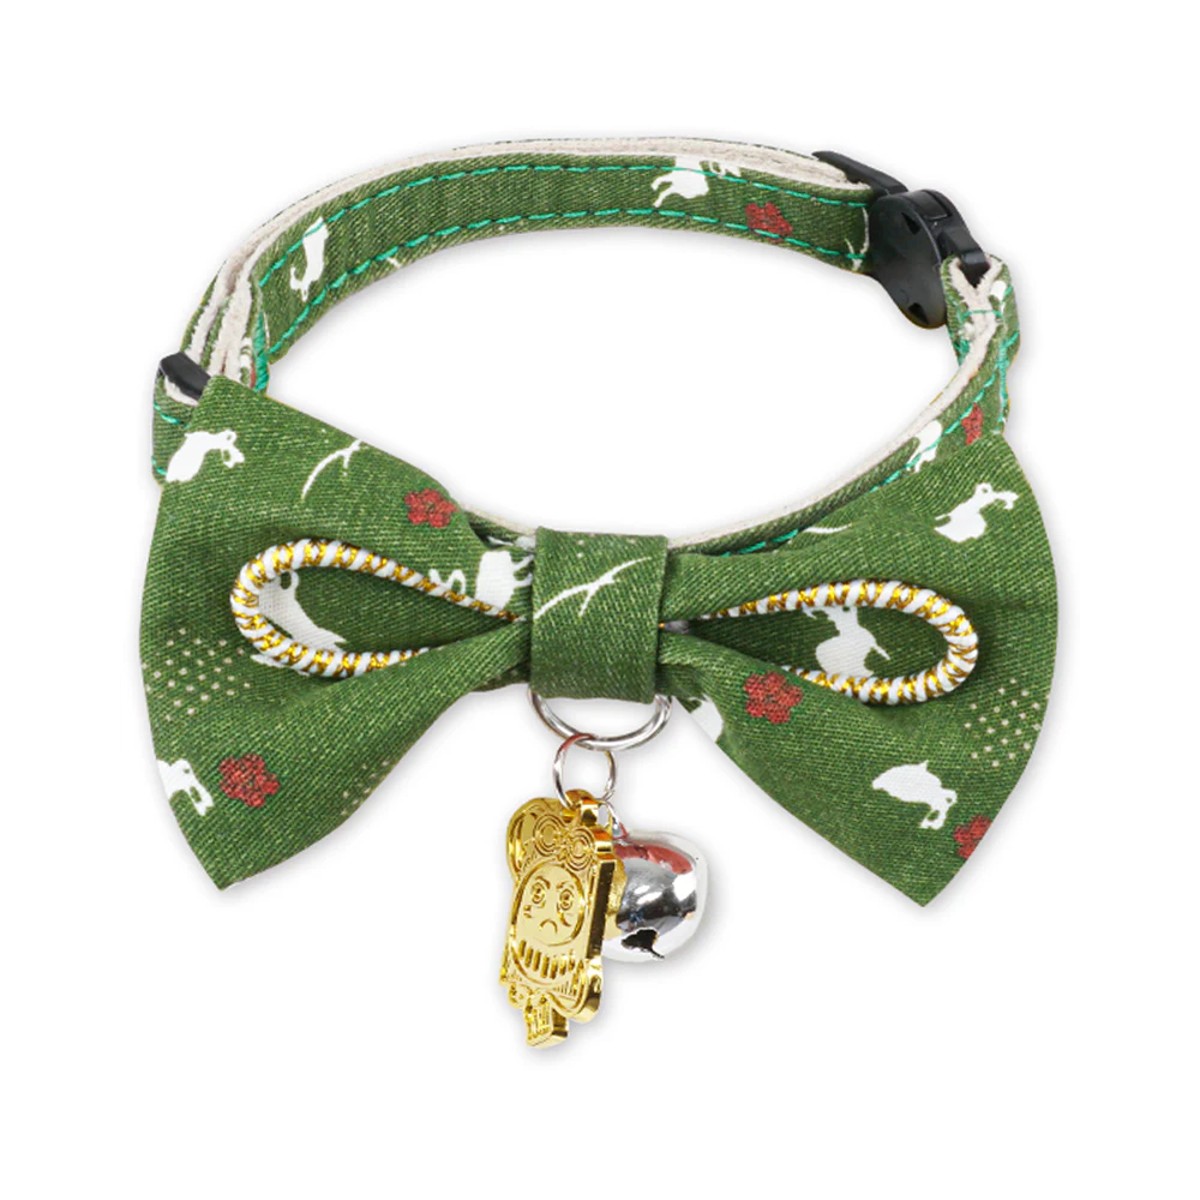 Pet Life Touchcat Glampurr Designer Cat Collar with Bow - Green